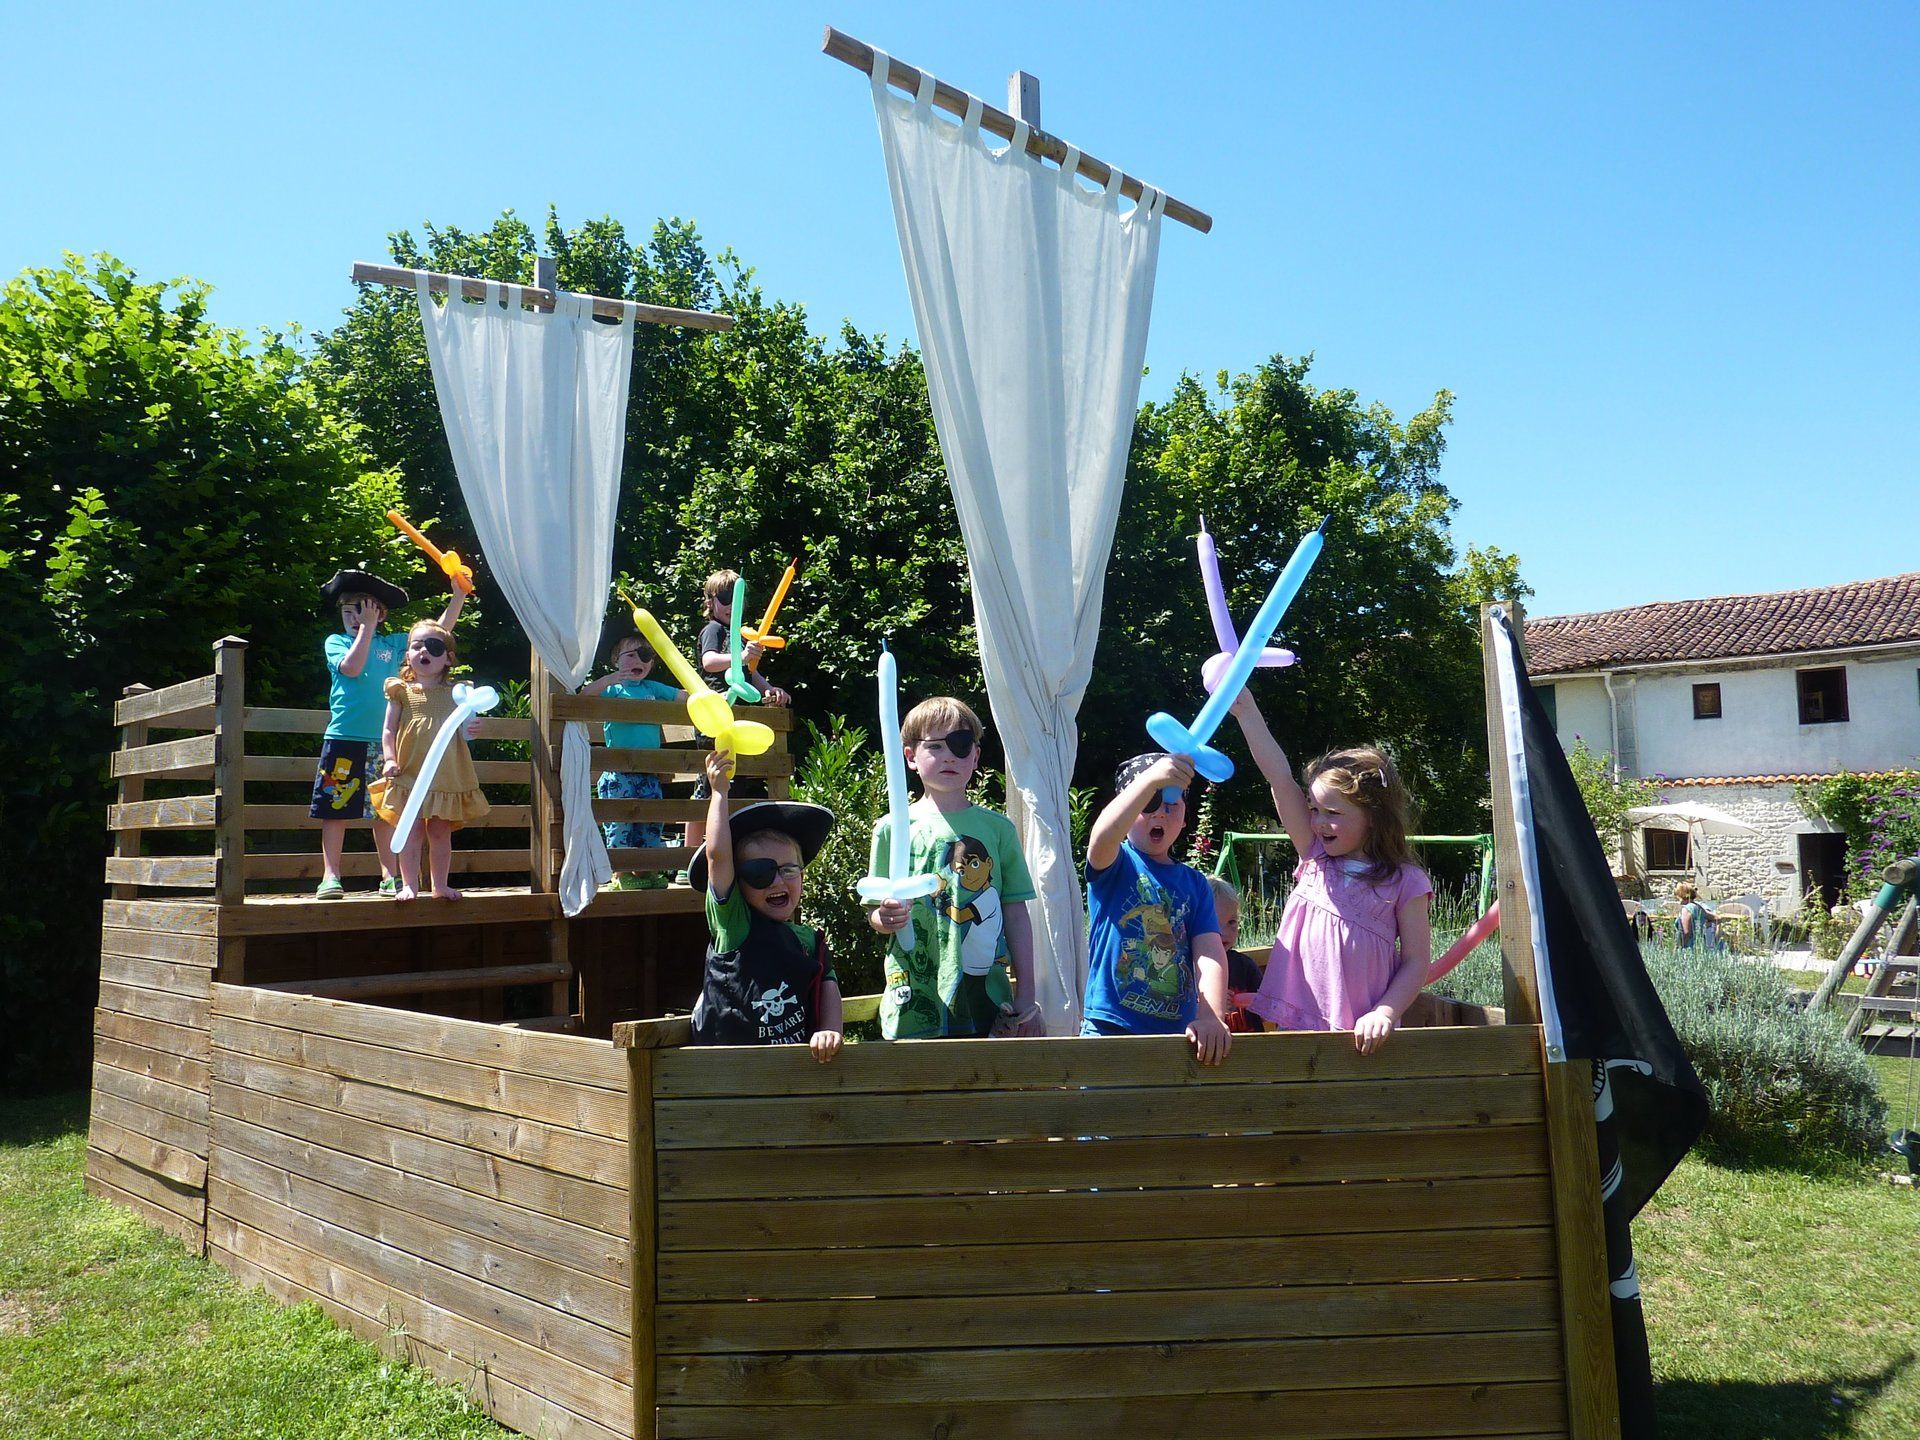 children waving balloon swords in a play pirate ship